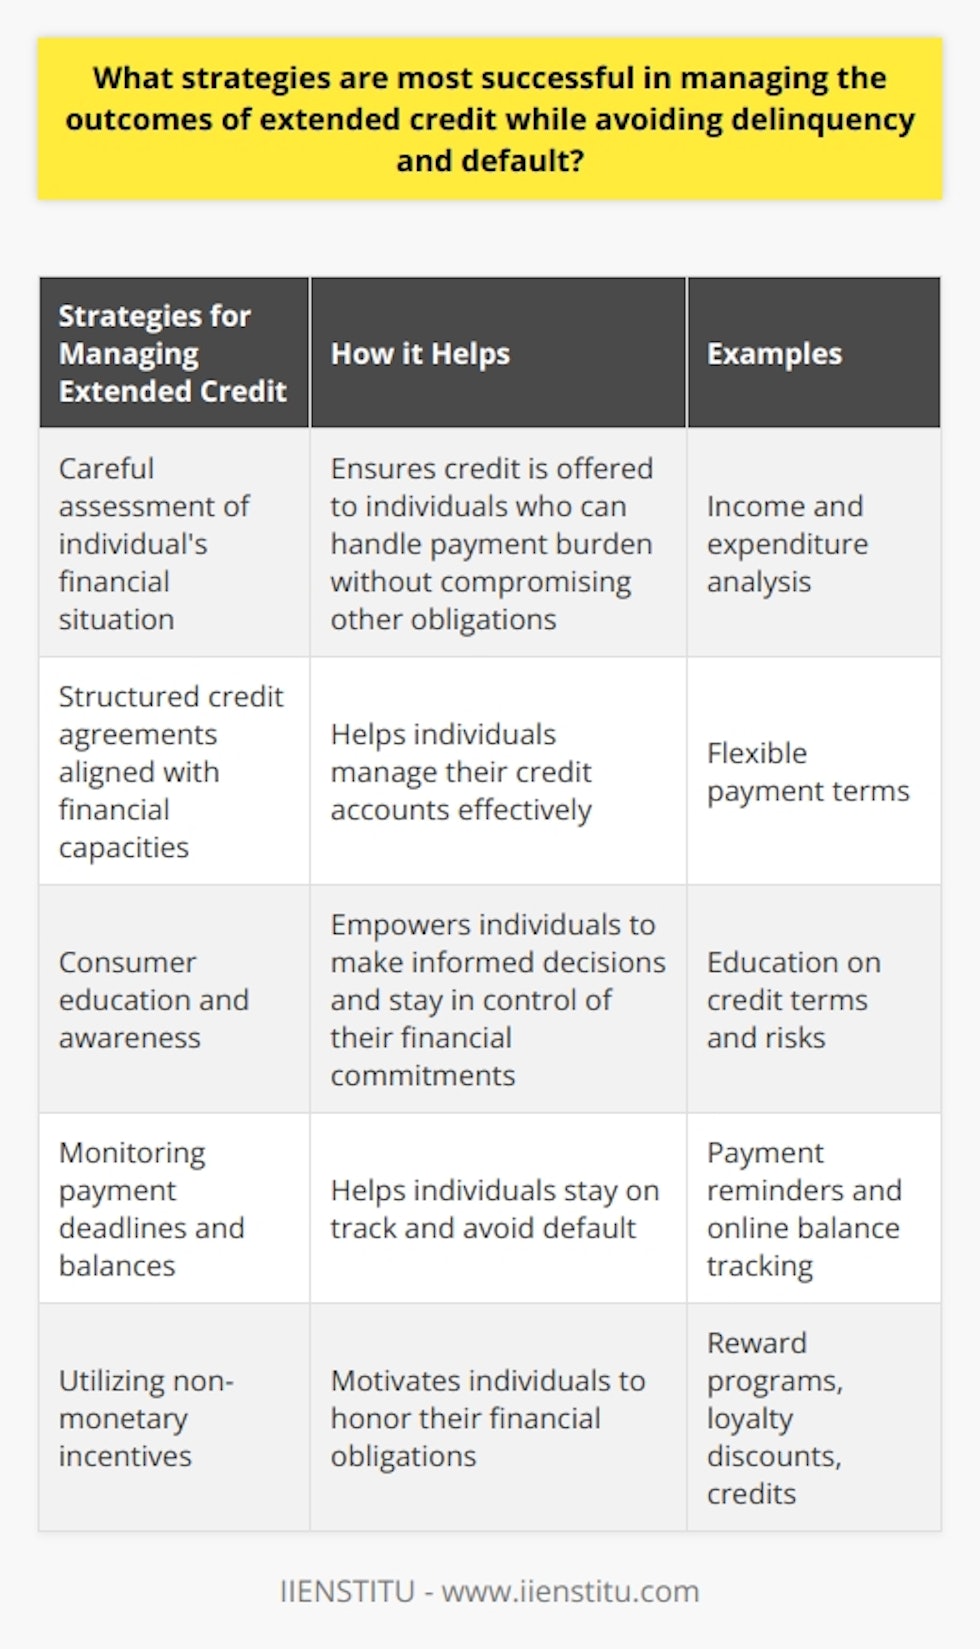 Managing the outcomes of extended credit while avoiding delinquency and default requires effective strategies that address individual financial circumstances, promote consumer education and awareness, and incorporate non-monetary incentives. By employing these strategies, the risk of delinquency and default can be minimized, ensuring the success of extended credit initiatives.Firstly, it is crucial to carefully assess and manage an individual's financial situation before extending credit. Credit should only be offered to individuals who can realistically handle the payment burden without compromising their other financial obligations. This assessment should include a thorough understanding of income and expenditures to ensure that consumers can honor their financial commitments. Additionally, the terms of credit agreements should be structured to align with the individual's financial capacities, ensuring that the consumer's burden remains manageable throughout the extended credit period.Consumer education and awareness play a significant role in preventing delinquency and default. Consumers must be fully informed about their obligations and the potential consequences of failing to meet them. By understanding the terms, conditions, and potential risks associated with extended credit, individuals are better equipped to manage their credit accounts effectively. Monitoring payment deadlines and keeping track of balances can help consumers stay in control of their financial commitments. Knowledge of variable expenditures and their potential impact can also assist individuals in making informed decisions regarding their credit accounts.Furthermore, non-monetary incentives can be employed as an additional feature of comprehensive credit management. Recent research has shown that non-monetary incentives such as reward programs, loyalty discounts, and credits can effectively reduce delinquency and default on payments. For instance, offering rewards can motivate individuals to pay off their loans on time by providing them with lower interest payments or non-interest charges. Additionally, tips or discounts can act as social recognition, increasing consumers' pride in their financial engagements and strengthening their commitment to meeting their financial obligations.In summary, successful management of extended credit requires strategies that address individual financial circumstances, promote consumer education and awareness, and incorporate non-monetary incentives. By carefully assessing an individual's financial situation, offering credit only to those who can handle the payment burden, and structuring terms based on financial capacities, the risk of delinquency and default can be minimized. Educating consumers on their obligations and promoting awareness of credit management practices empowers individuals to make informed decisions and stay in control of their financial commitments. Finally, implementing non-monetary incentives, such as reward programs and discounts, can provide additional motivation for individuals to honor their financial obligations. By implementing these strategies, extended credit can be effectively managed, reducing the risk of delinquency and default.